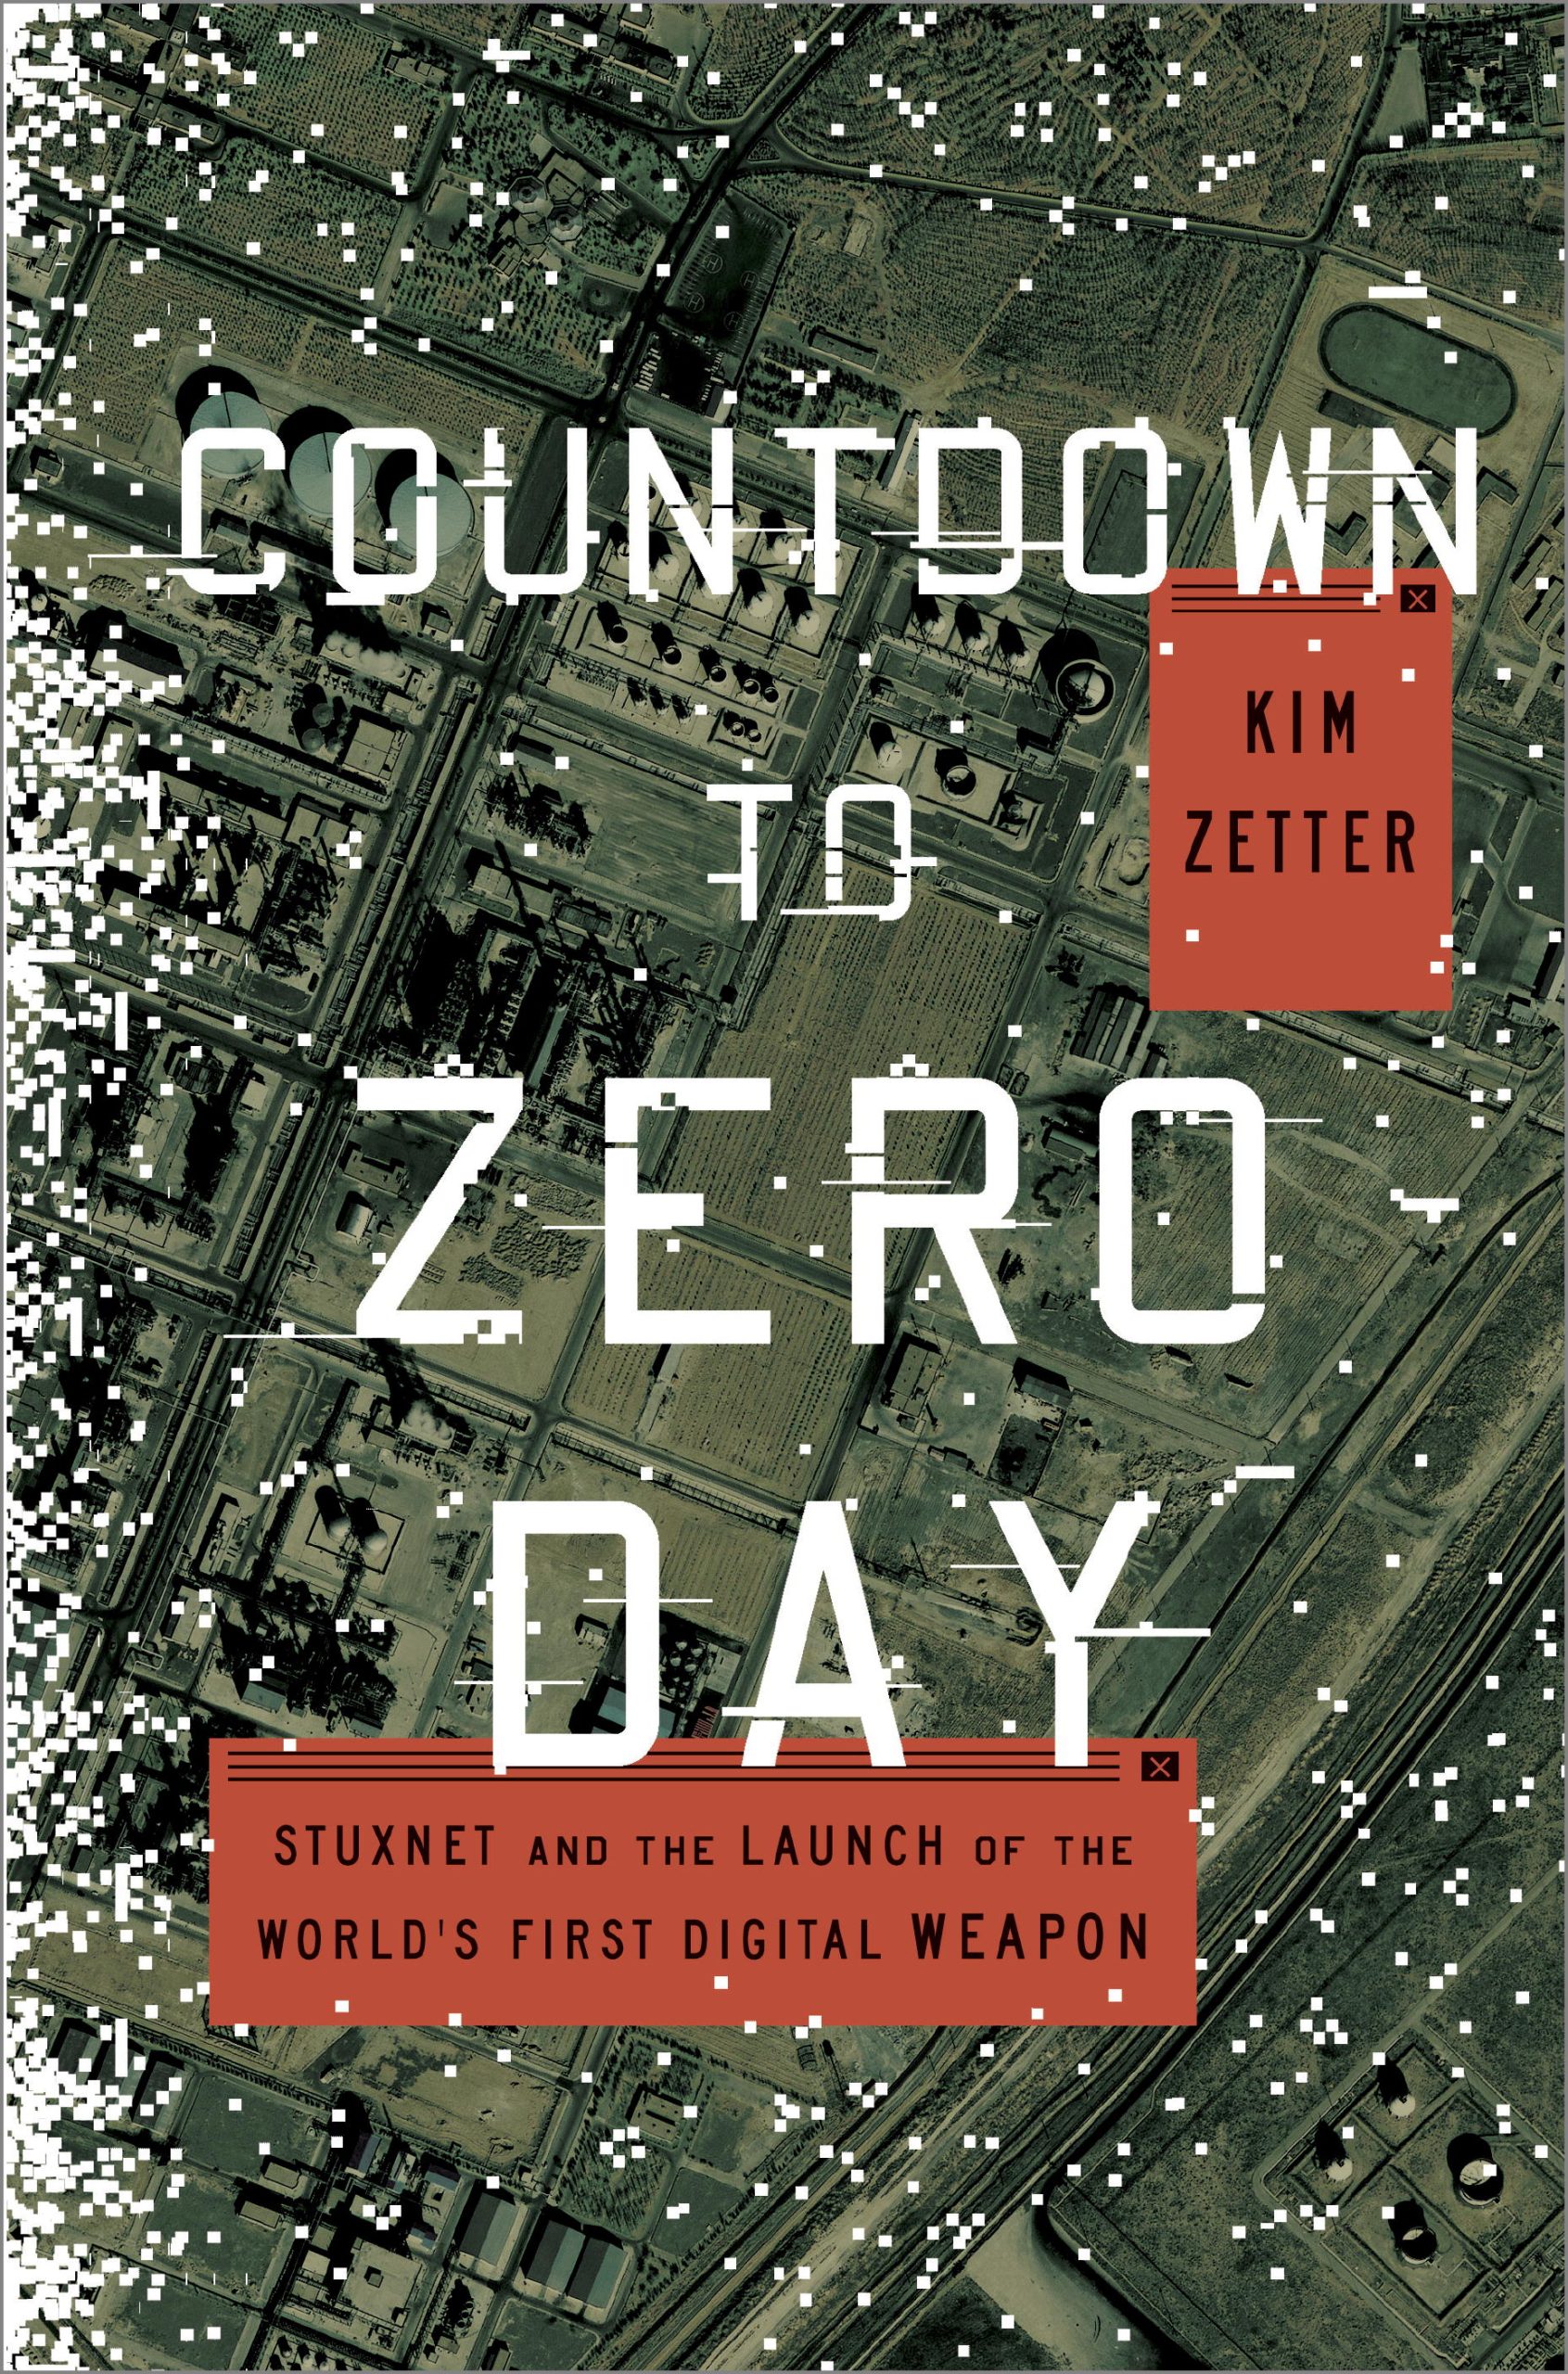 Kim Zetter wrote an acclaimed book, “Countdown to Zero Day: Stuxnet and the Launch of the World's First Digital Weapon,” about a sophisticated virus/worm developed by the U.S. and Israel to covertly sabotage Iran's nuclear program.